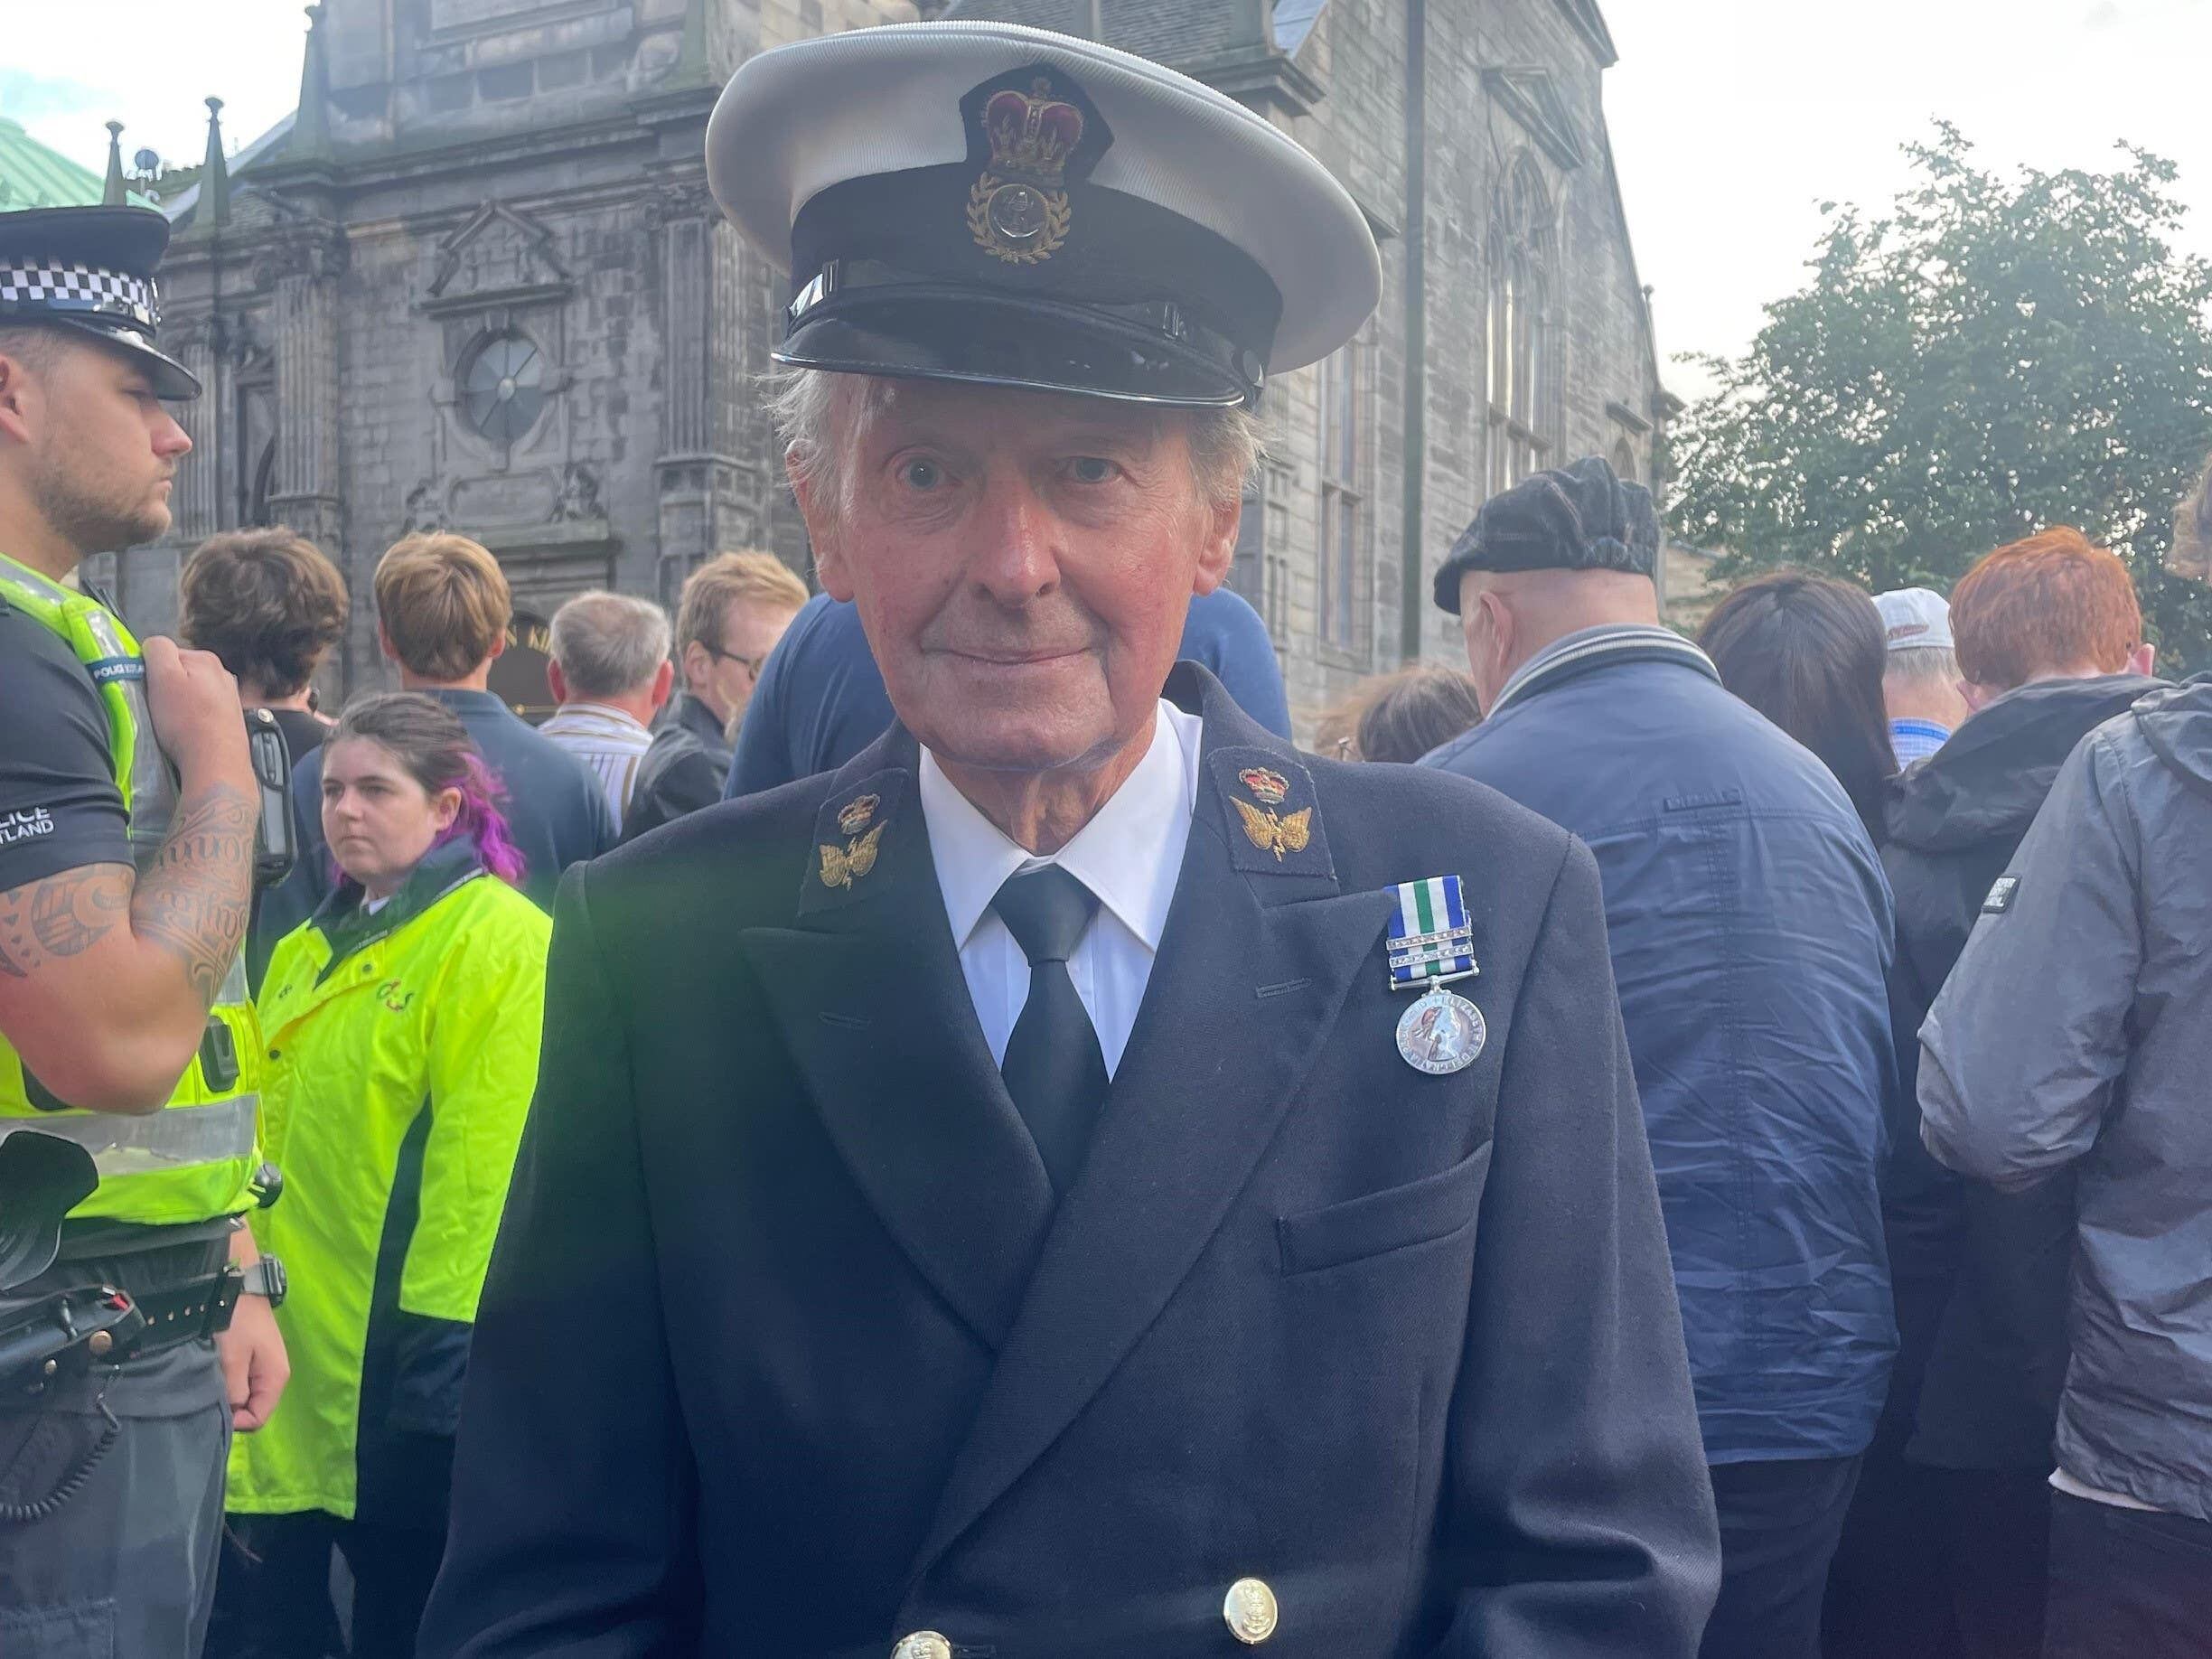 Retired naval officer puts on uniform ‘one last time’ for the Queen